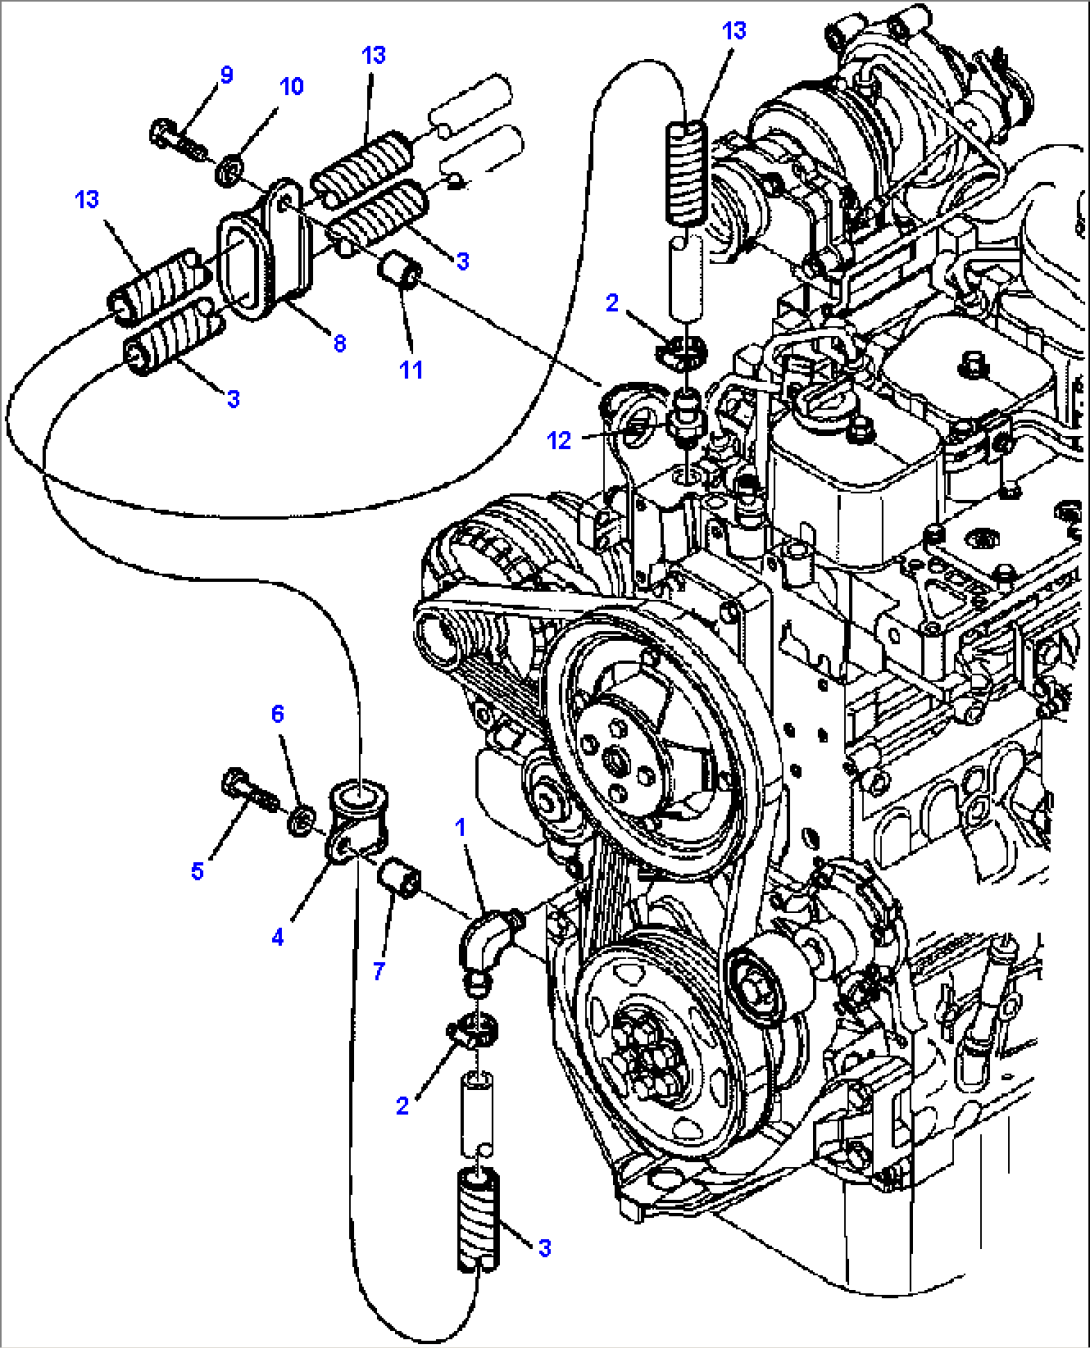 K5022-01A1 HEATING SYSTEM ENGINE CONNECTIONS